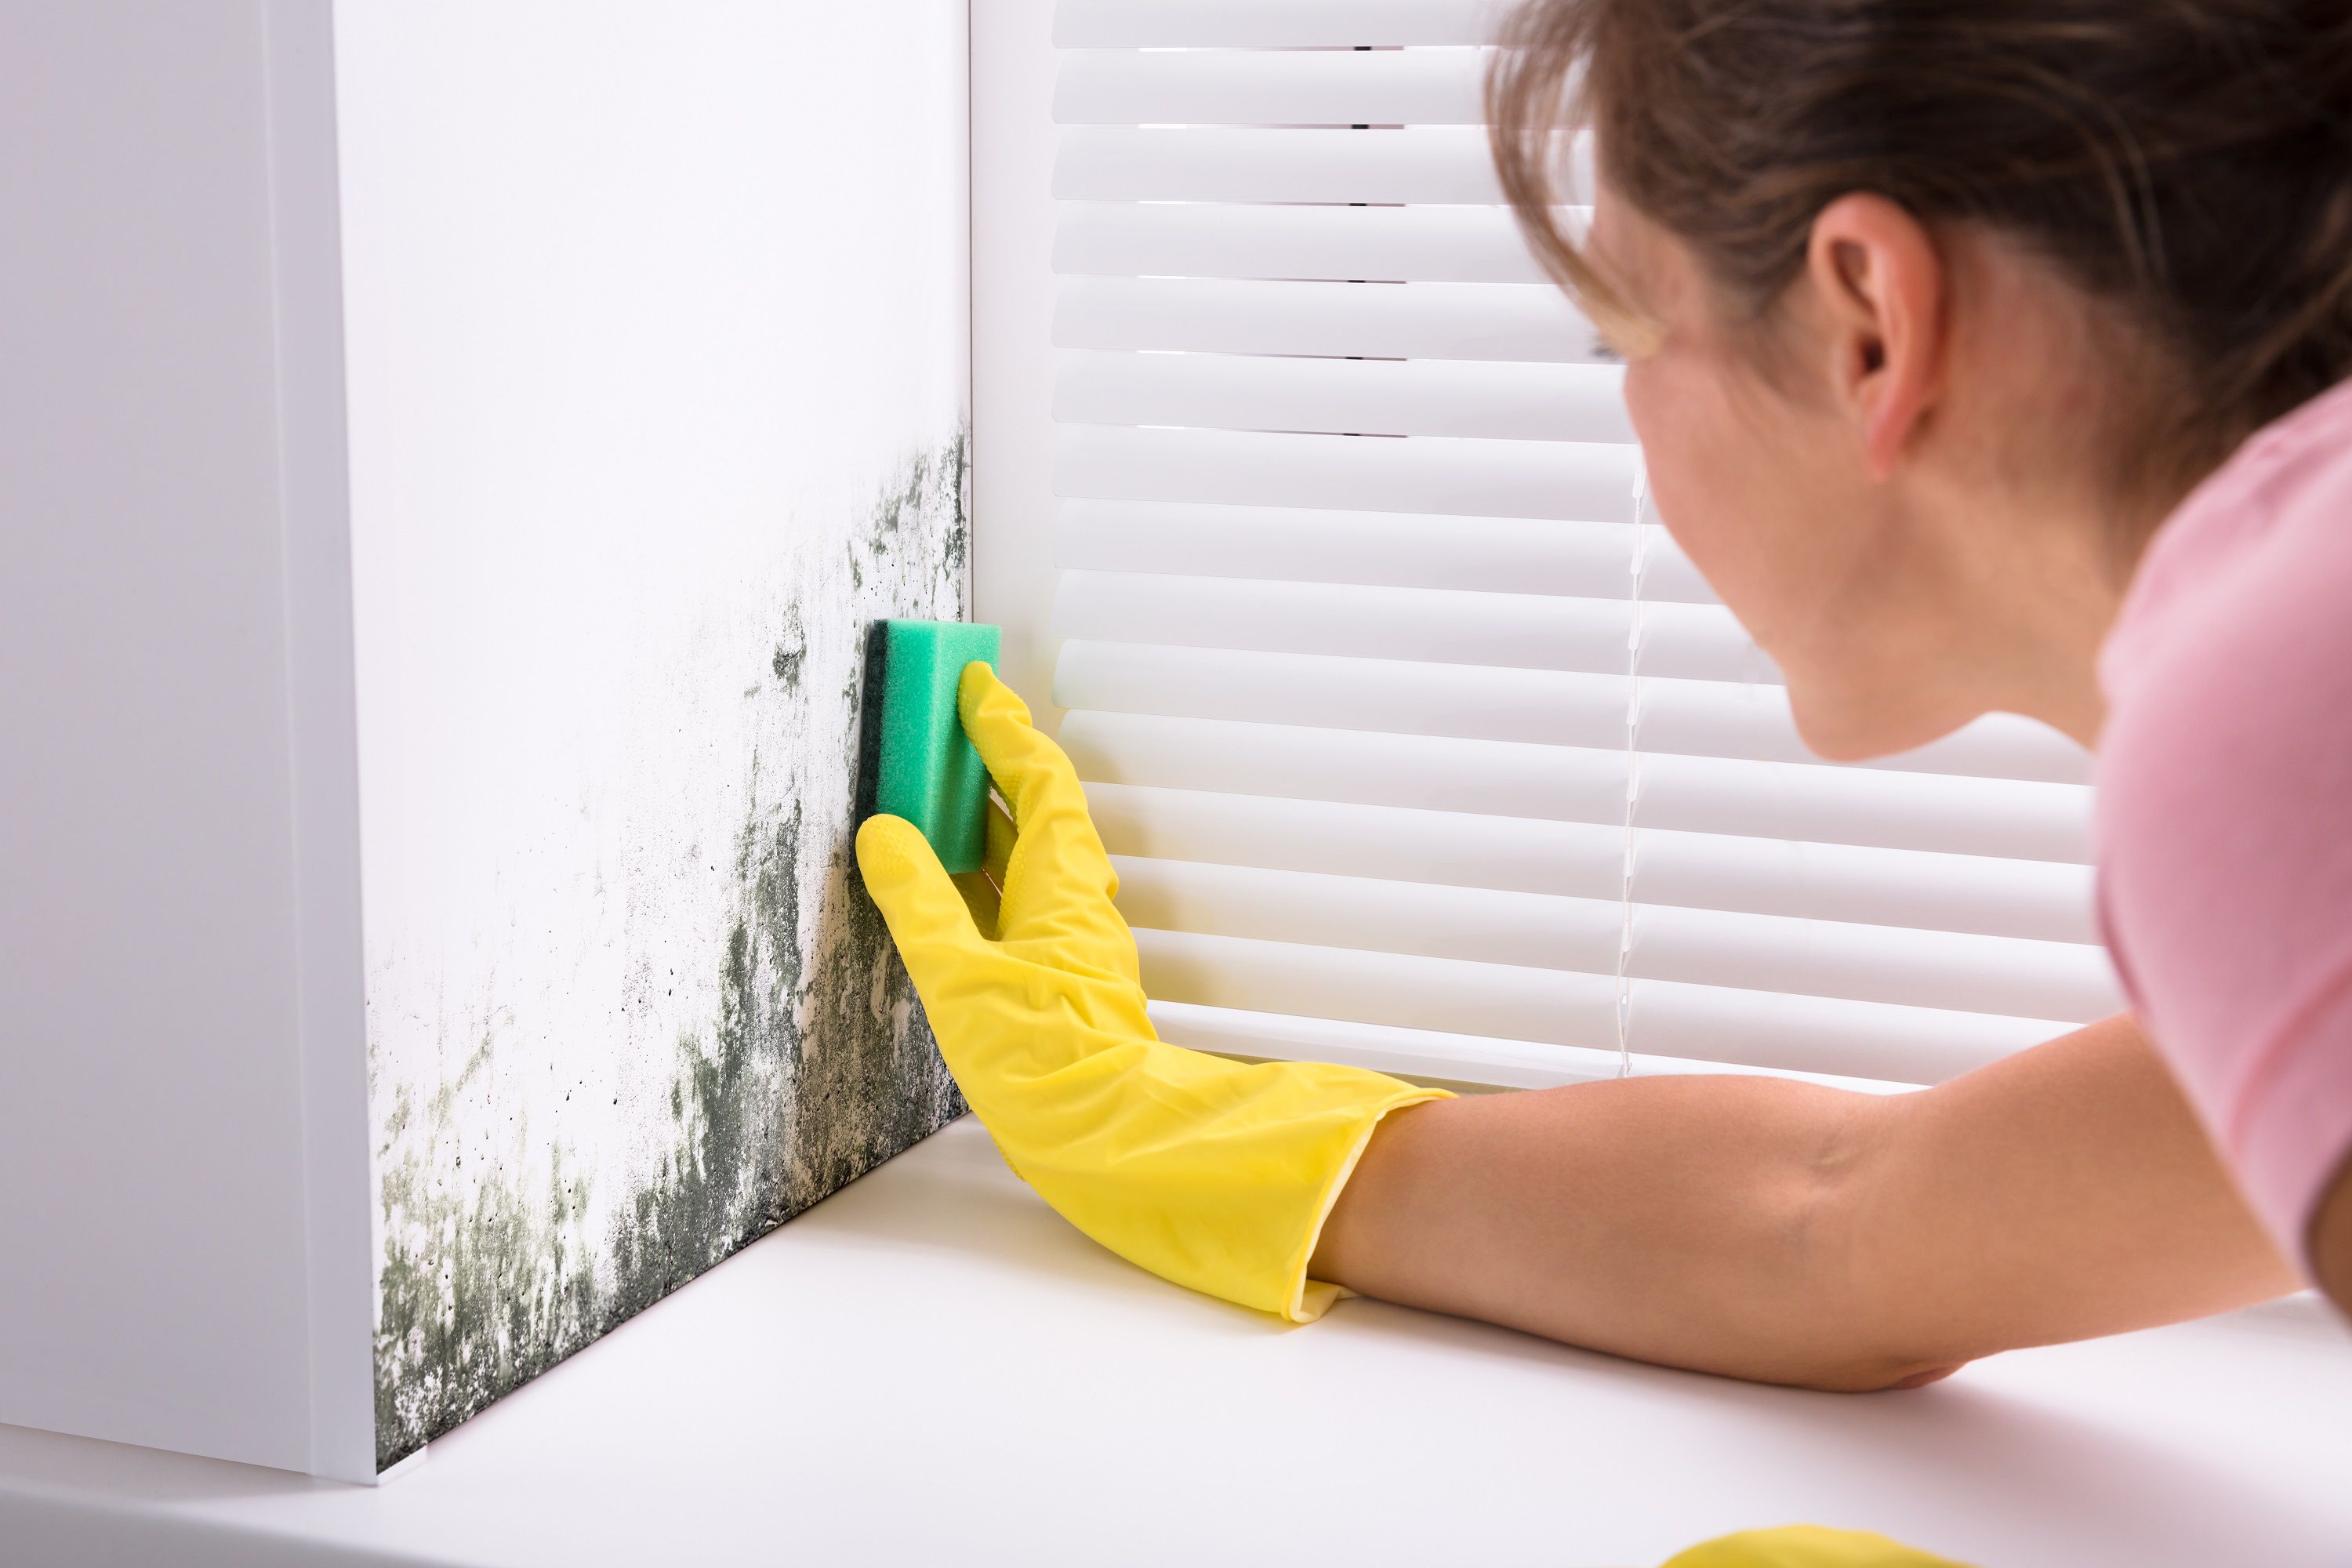 Can You Clean Up Mold Yourself?